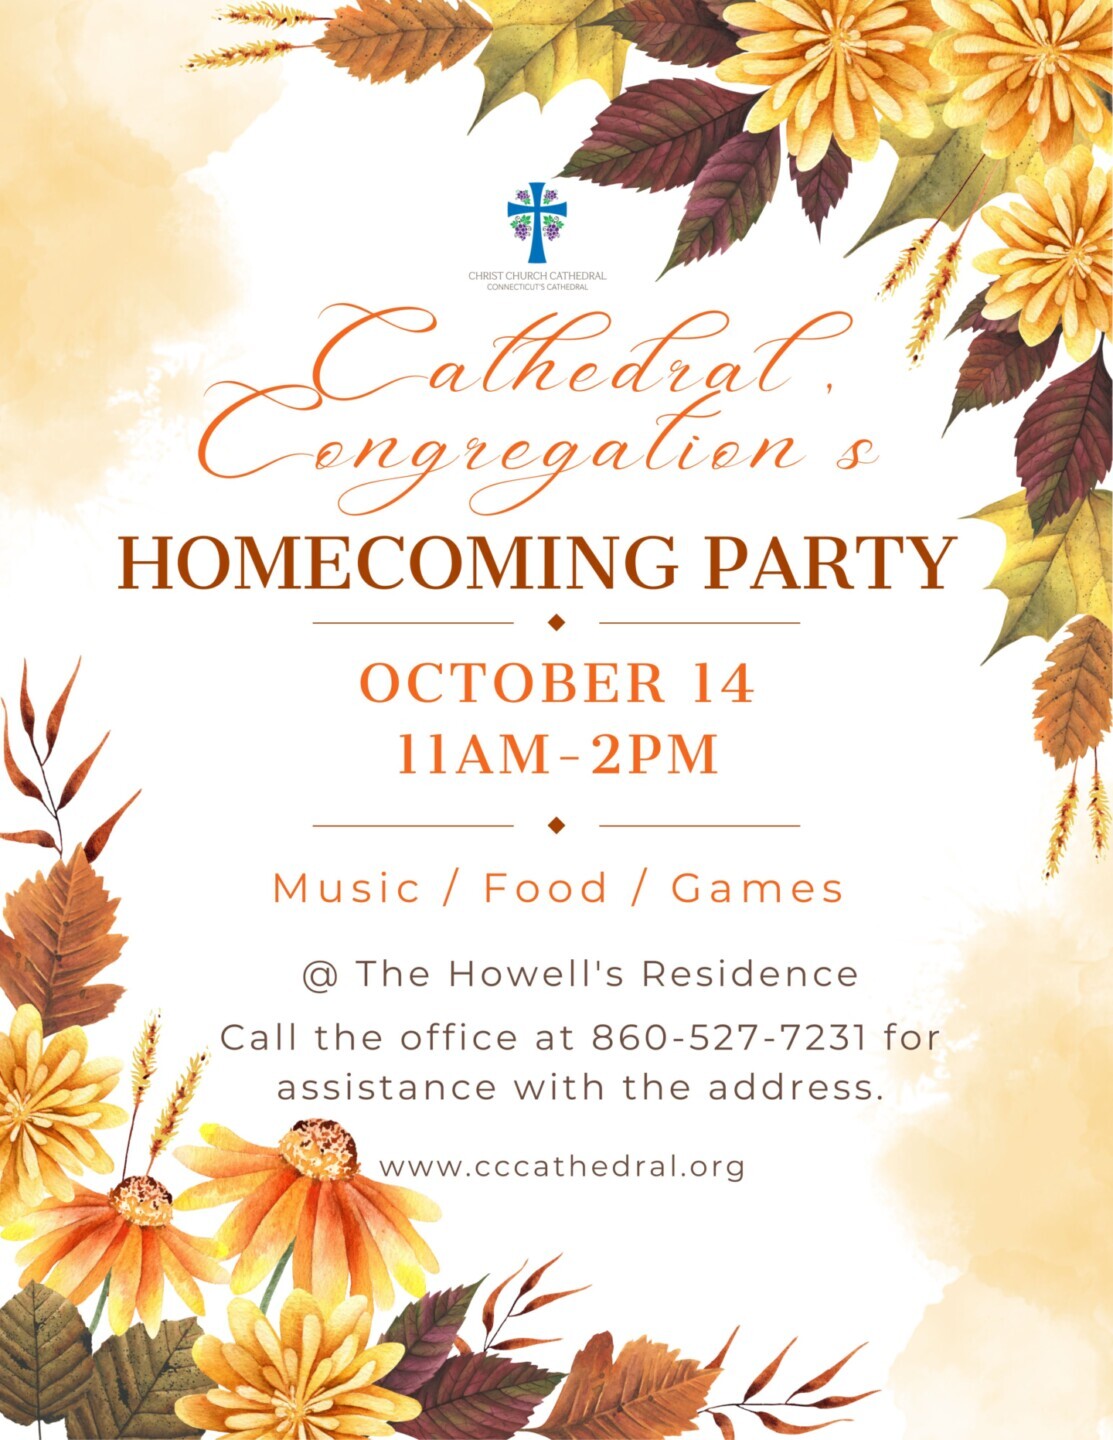 Cathedral Congregation Homecoming Party